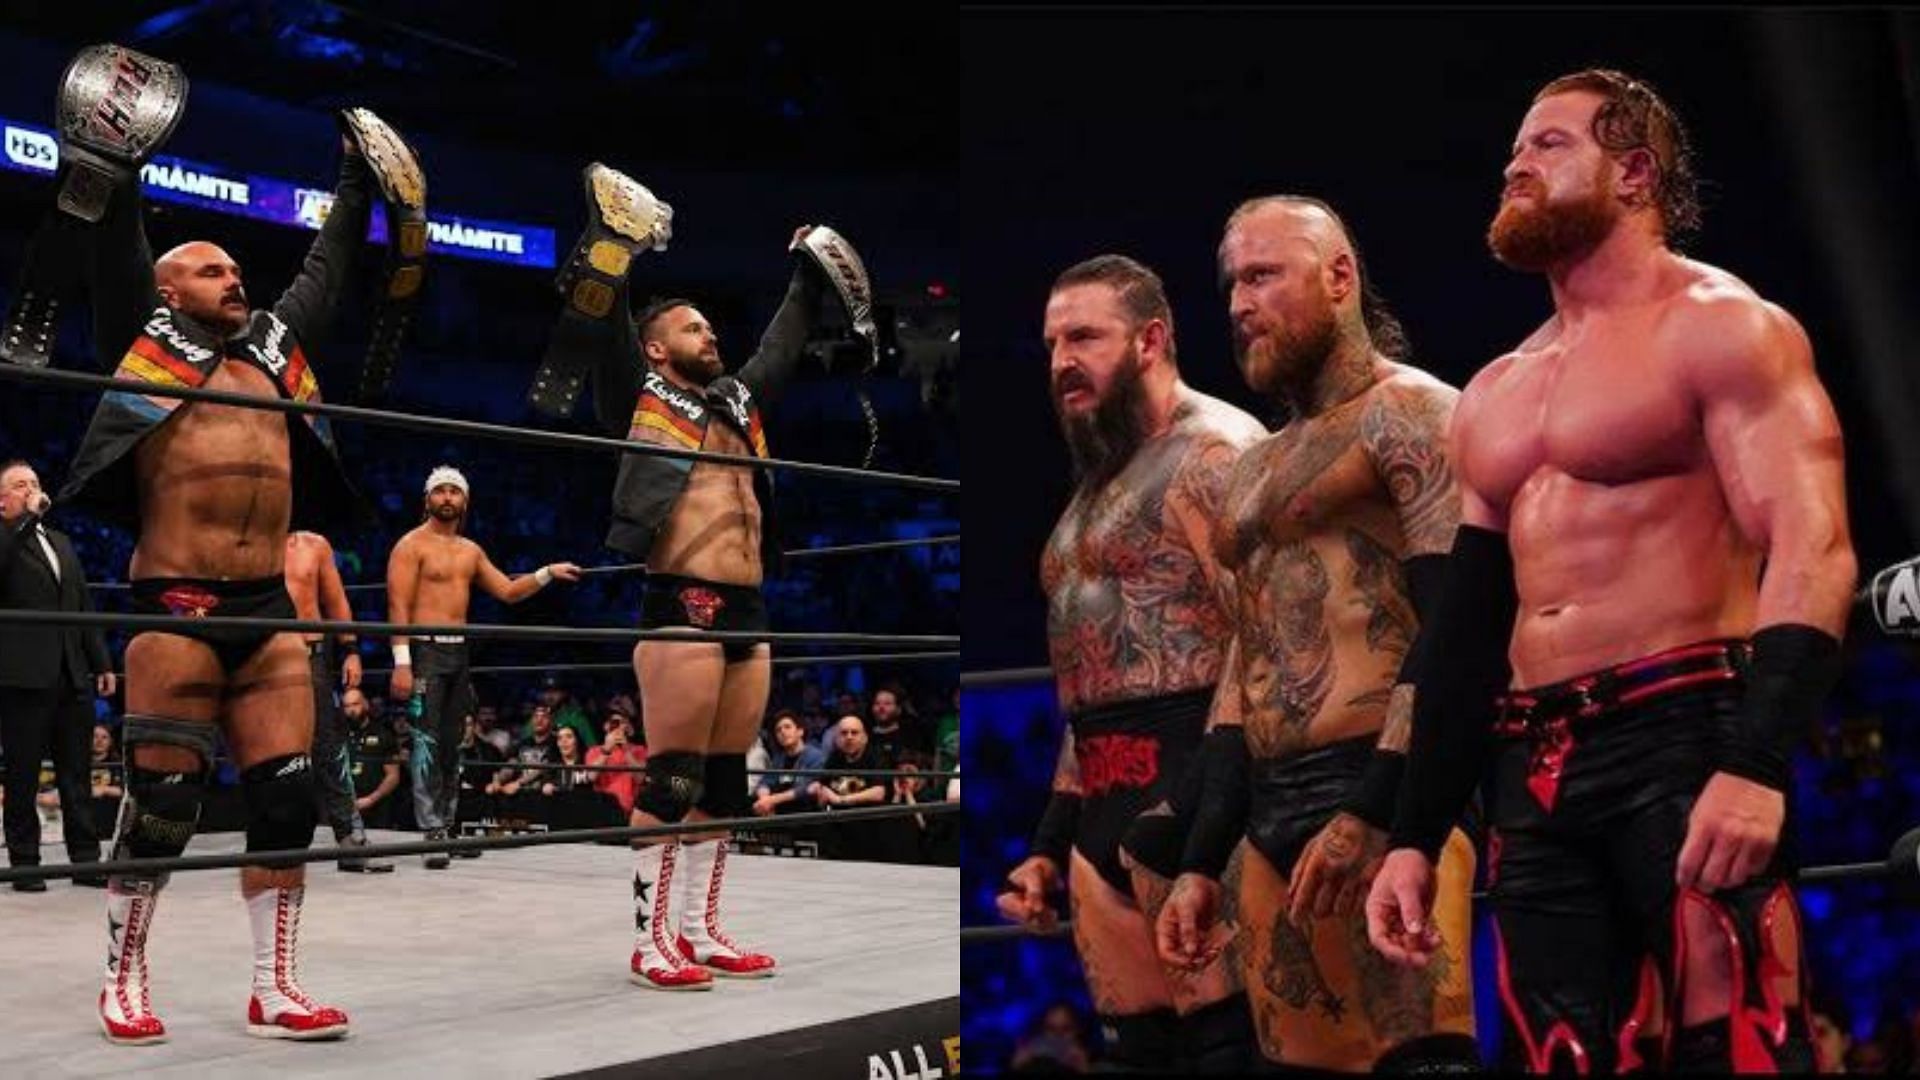 Could two former WWE Superstars join the likes of FTR and House of Black in a stacked tag team division?